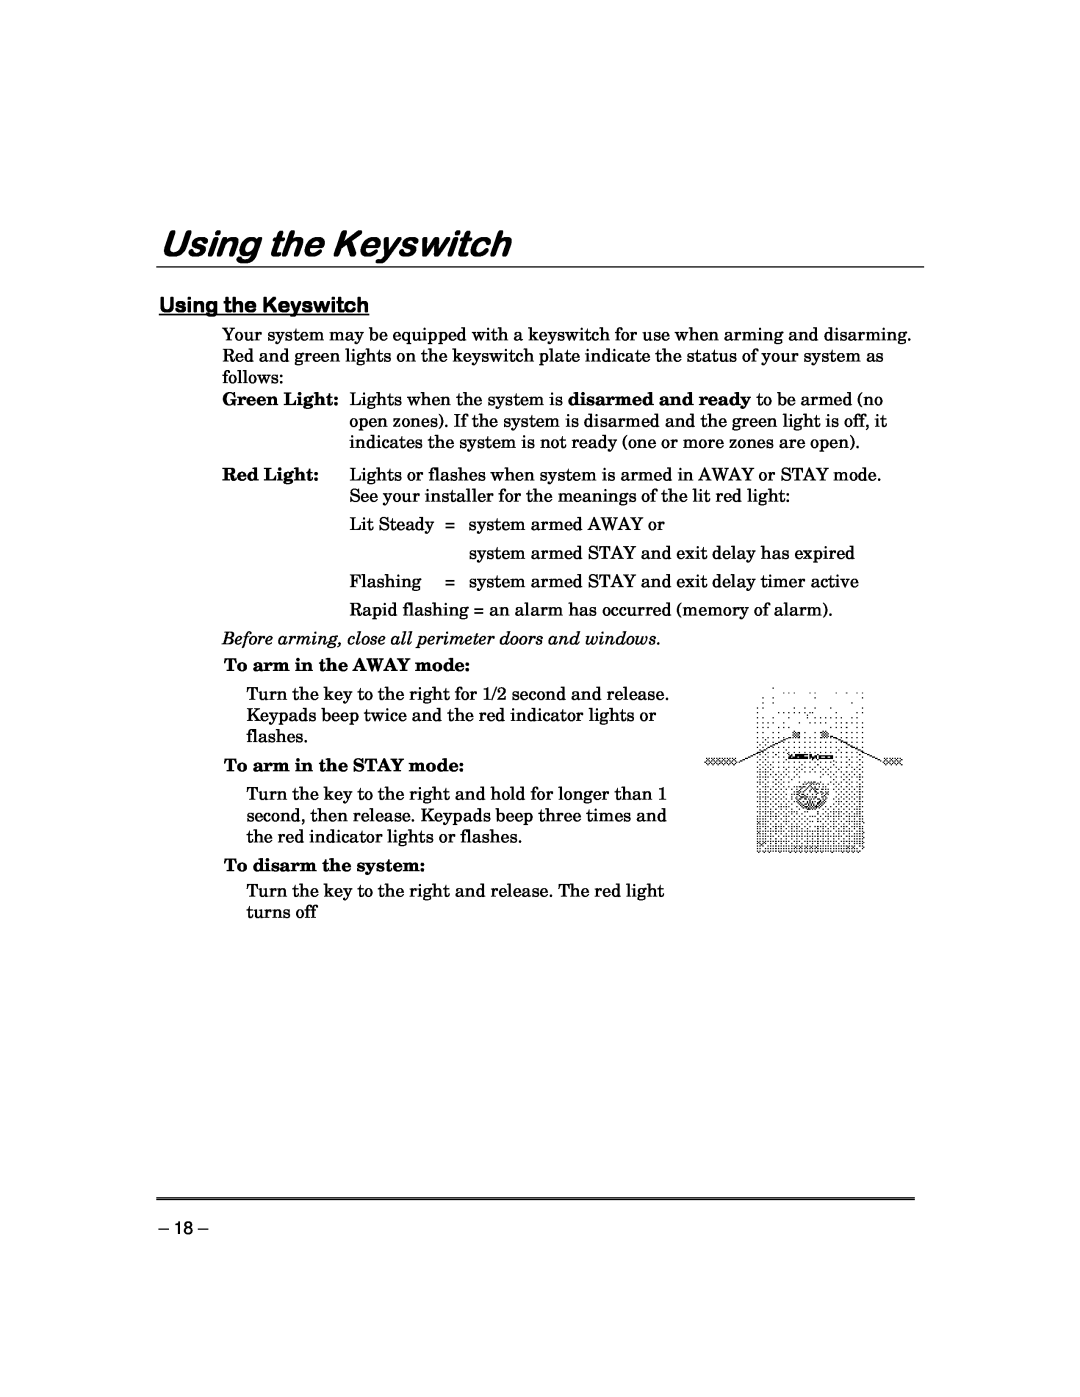 Garmin FA168CPS manual Using the Keyswitch, Before arming, close all perimeter doors and windows 